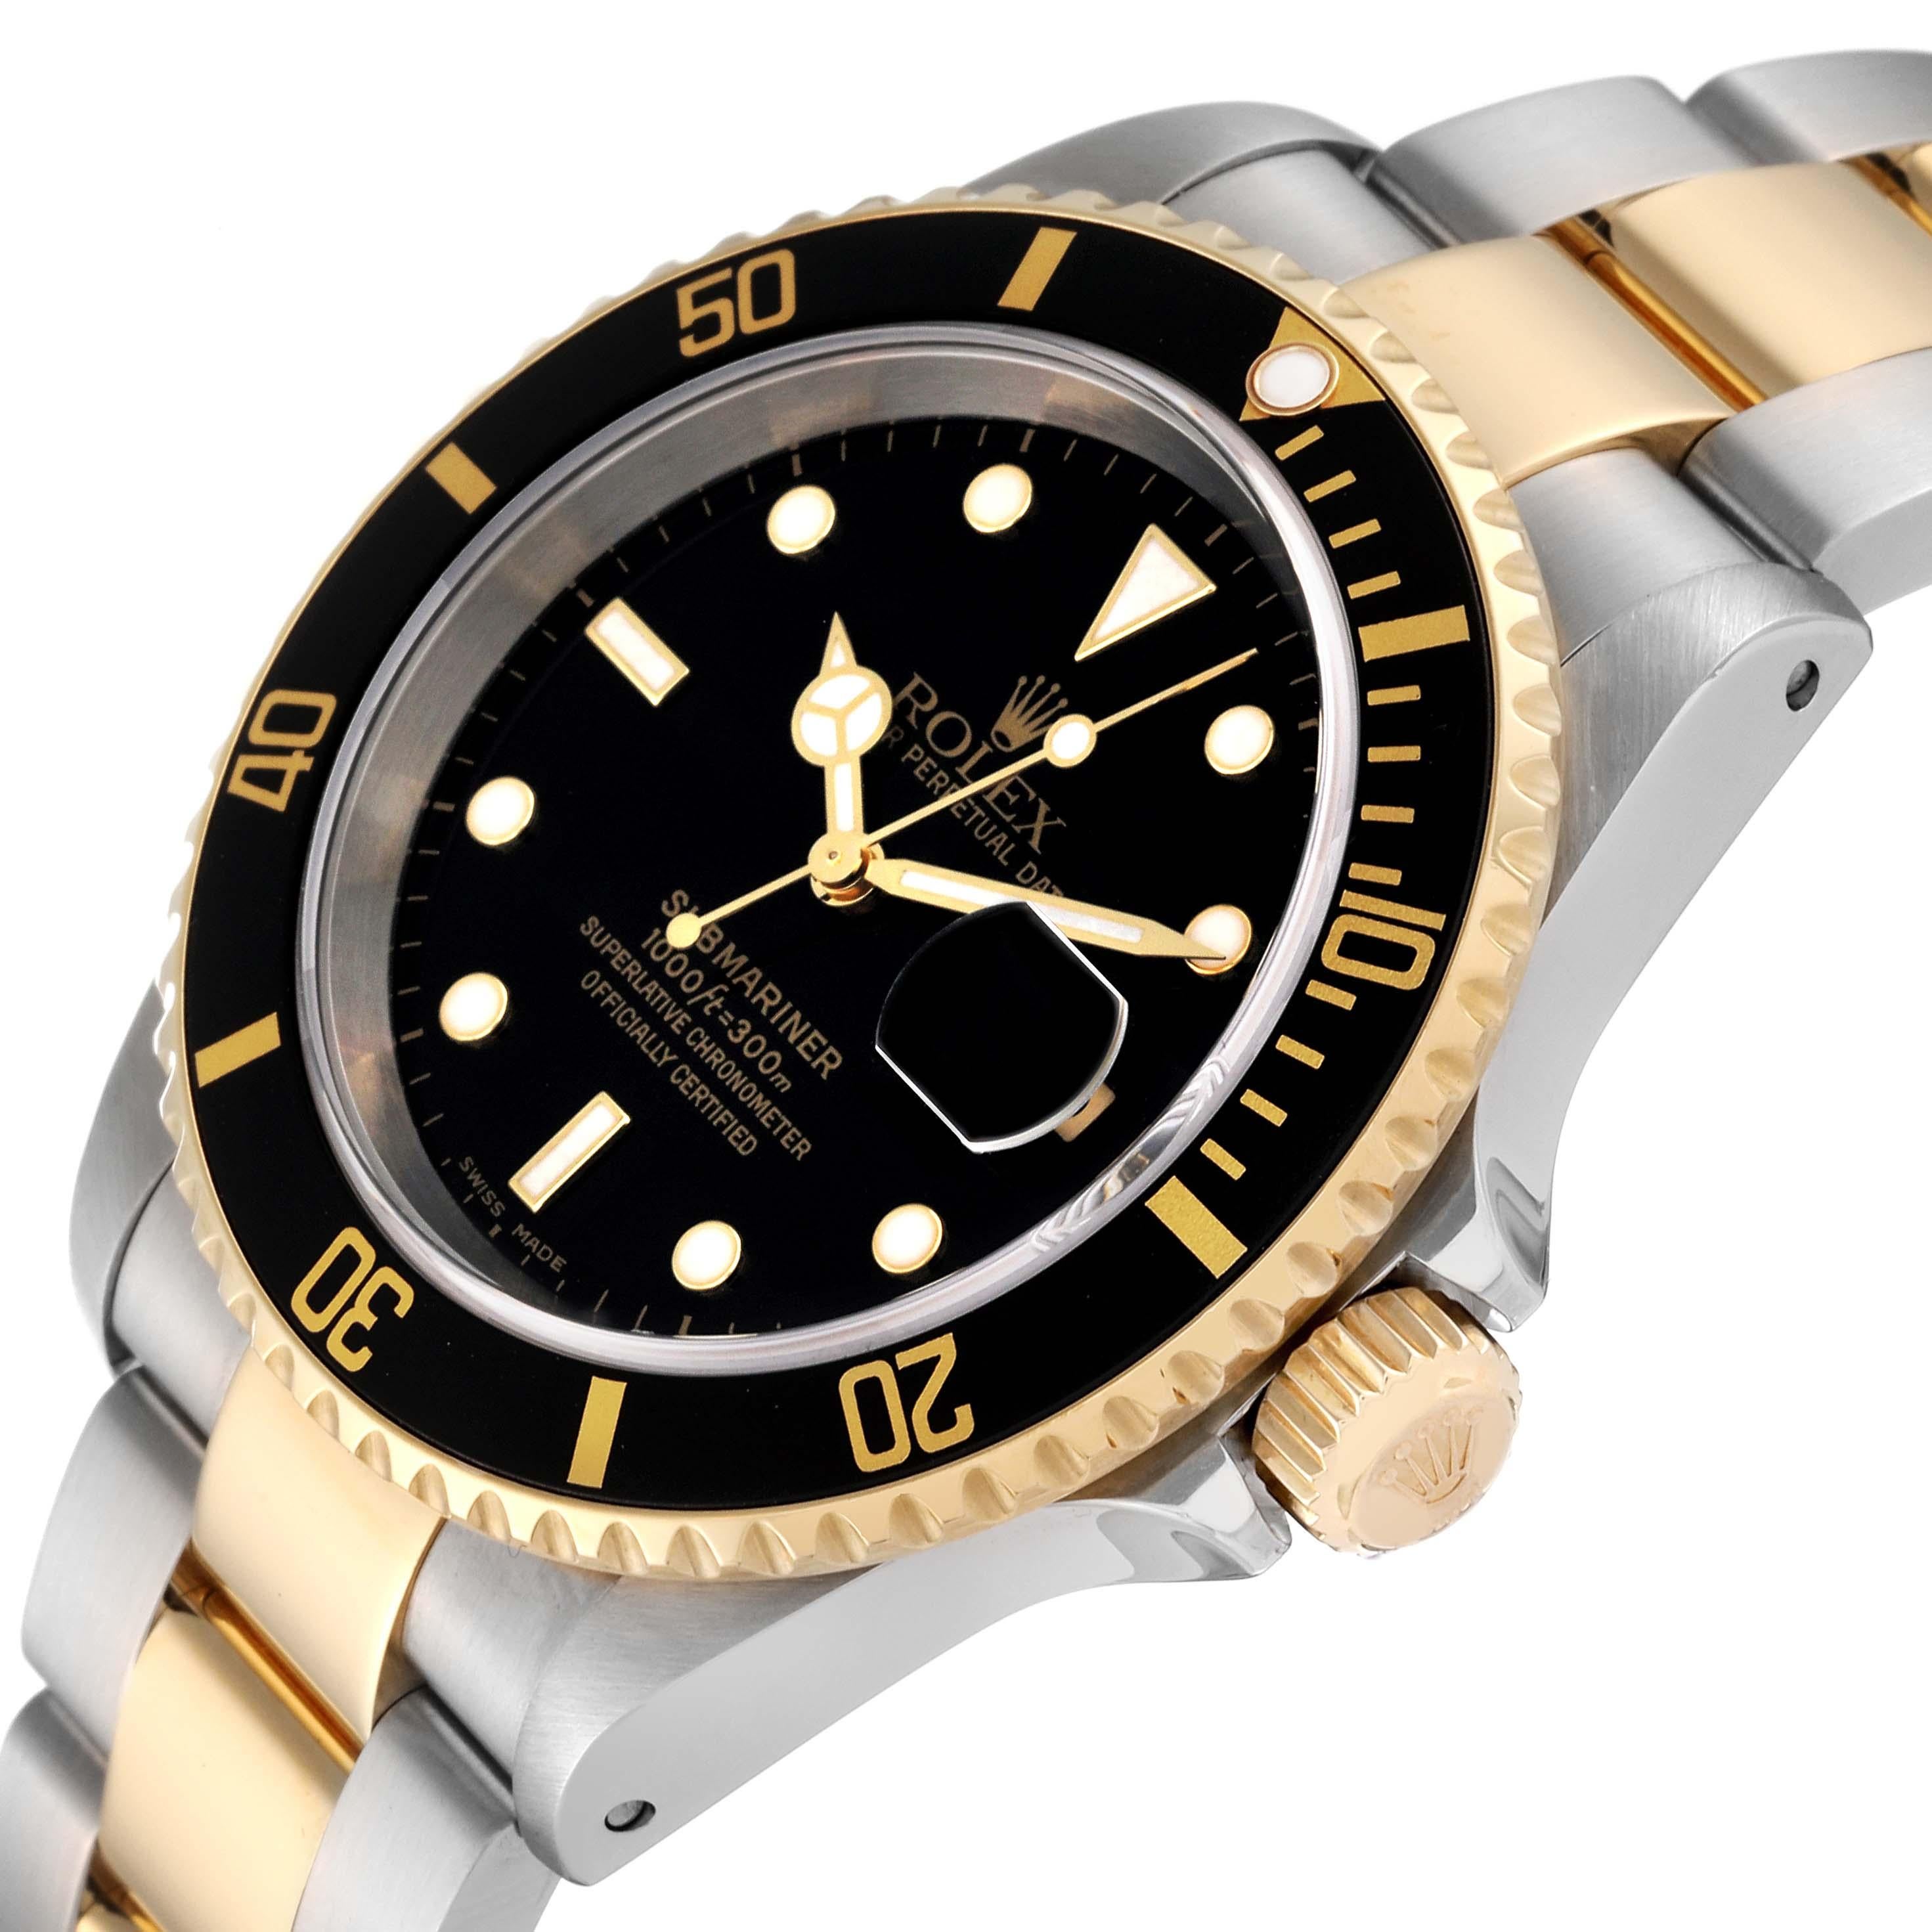 Rolex Submariner Steel Yellow Gold Black Dial Mens Watch 16613 Box Papers 3